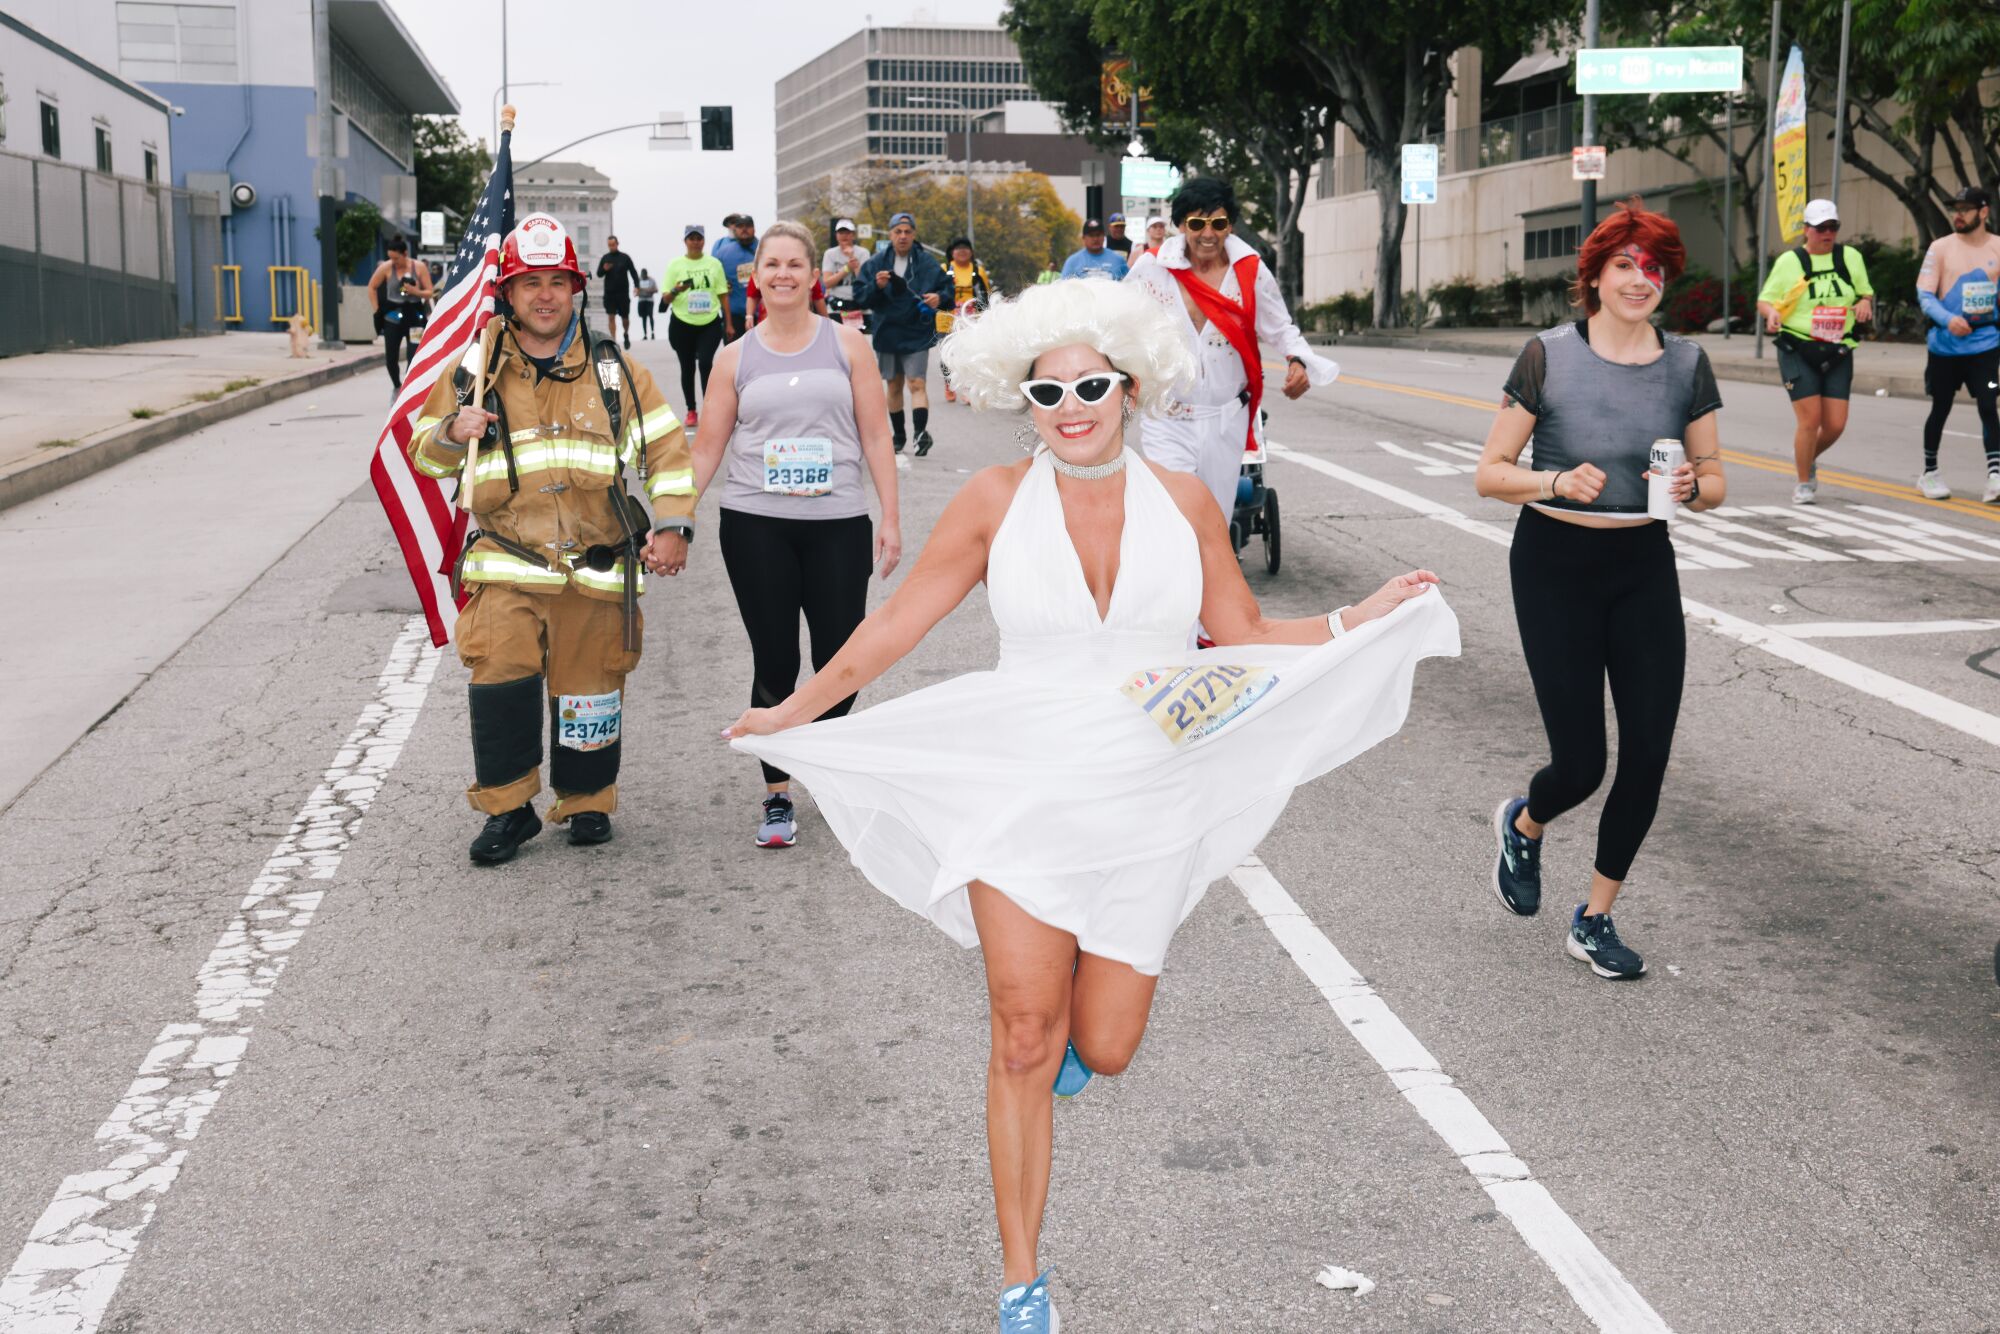 A runner dressed as Marilyn Monroe in a wig, sunglasses and white dress.